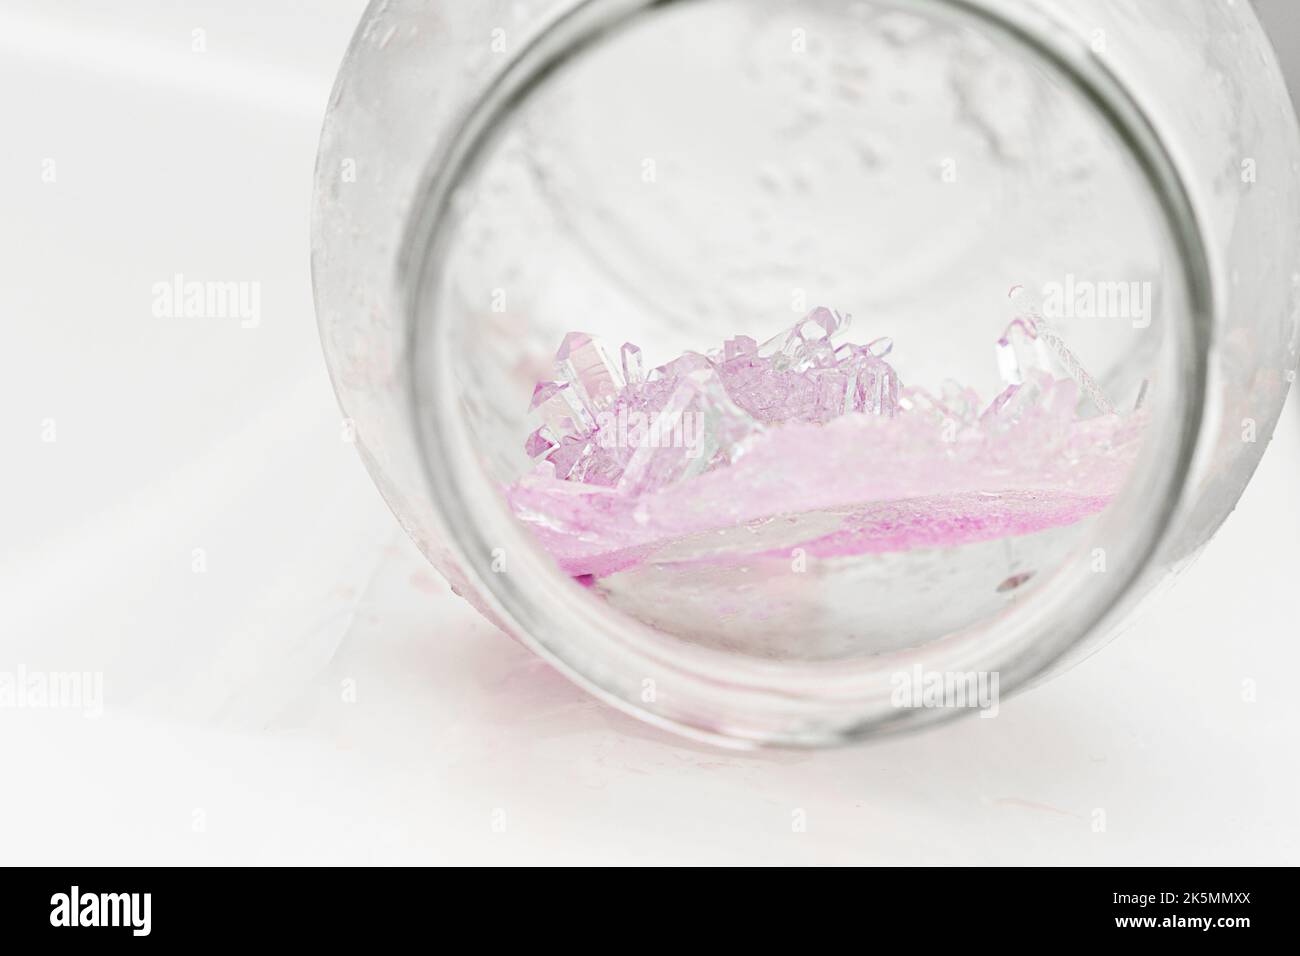 Chemical experiment on growing crystals. Crystal grown in a jar. Stock Photo